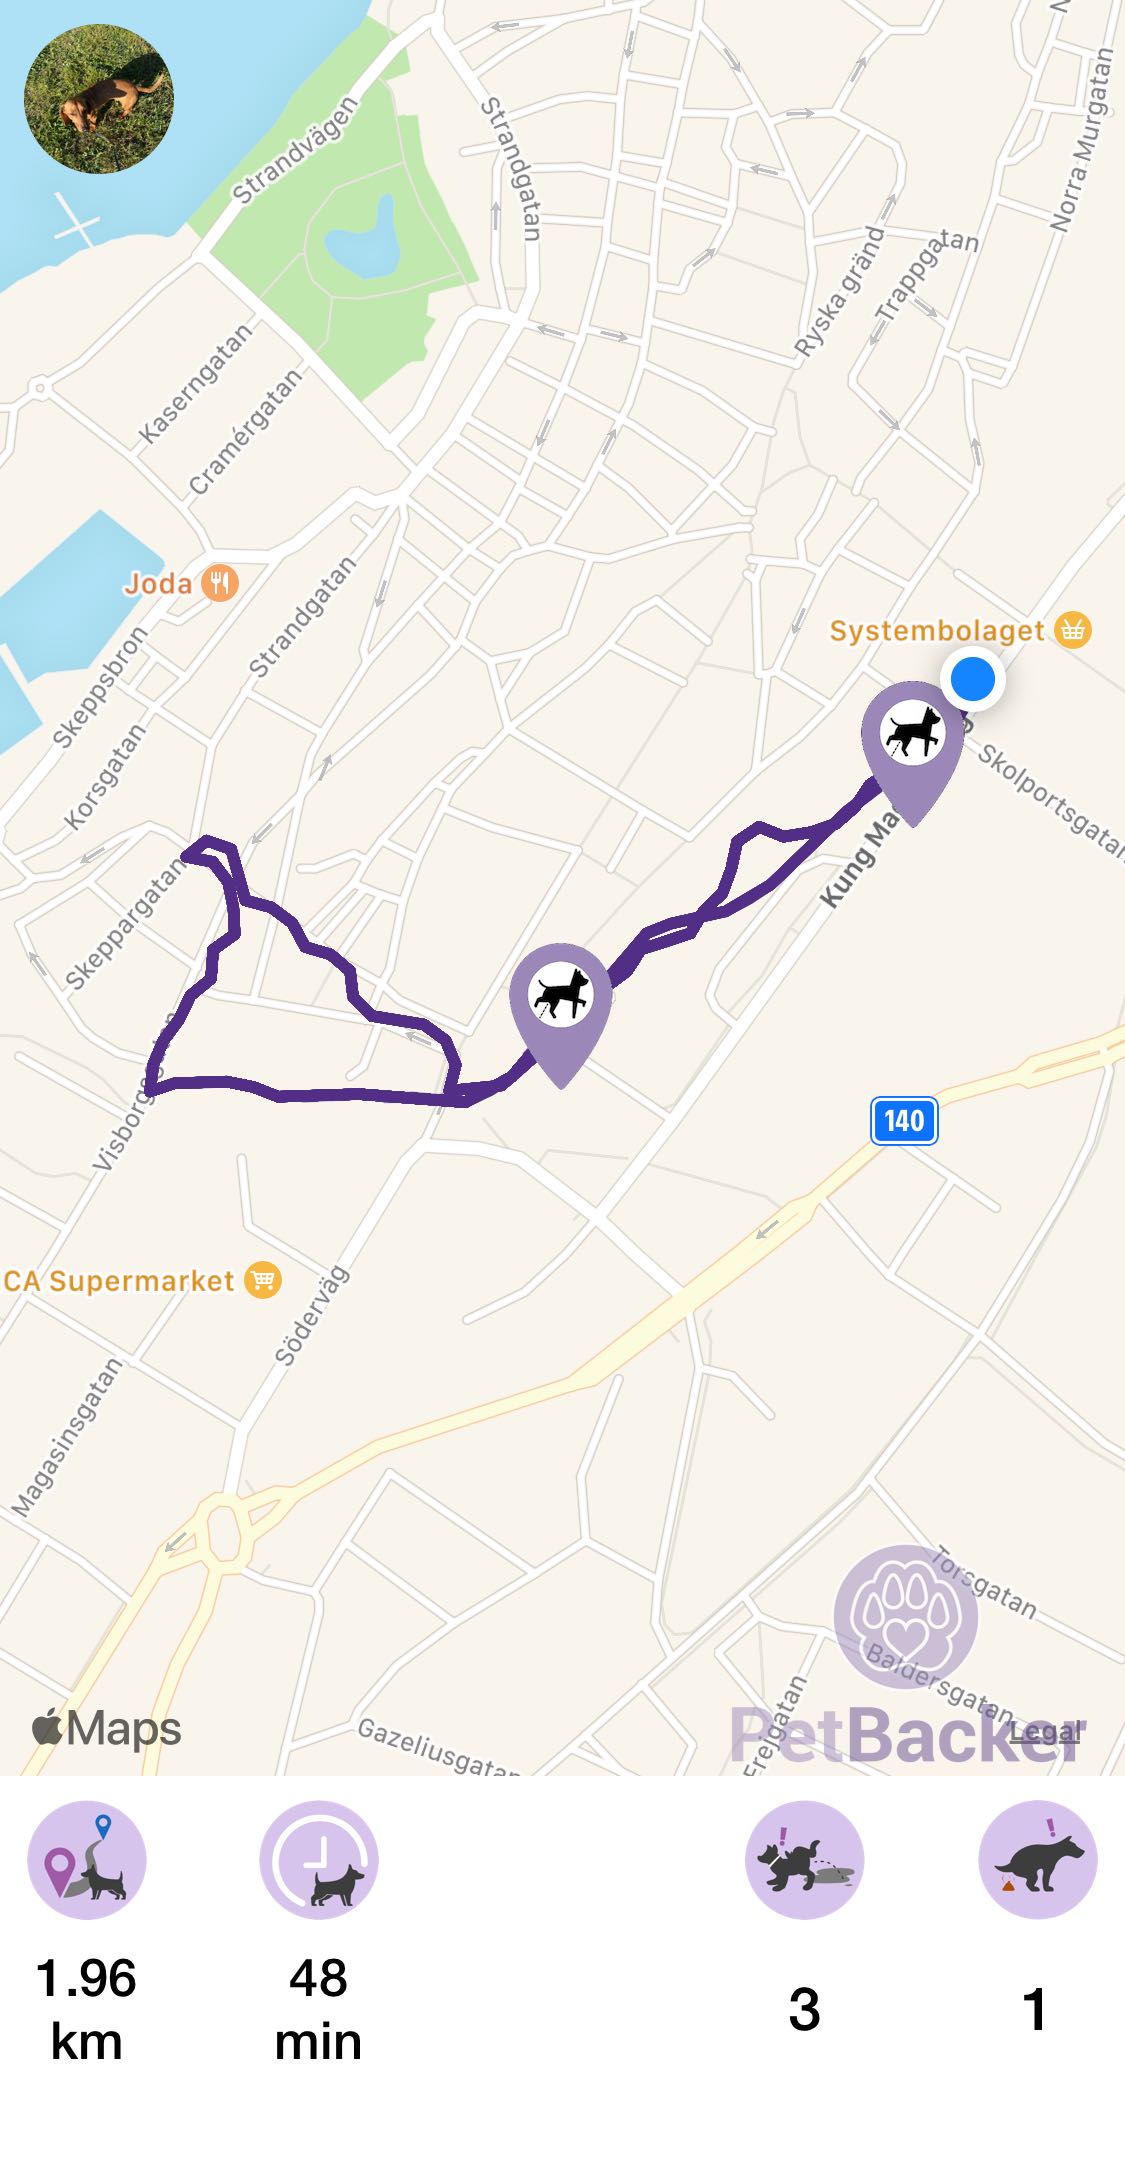 Just completed pet walking of 1.96 km